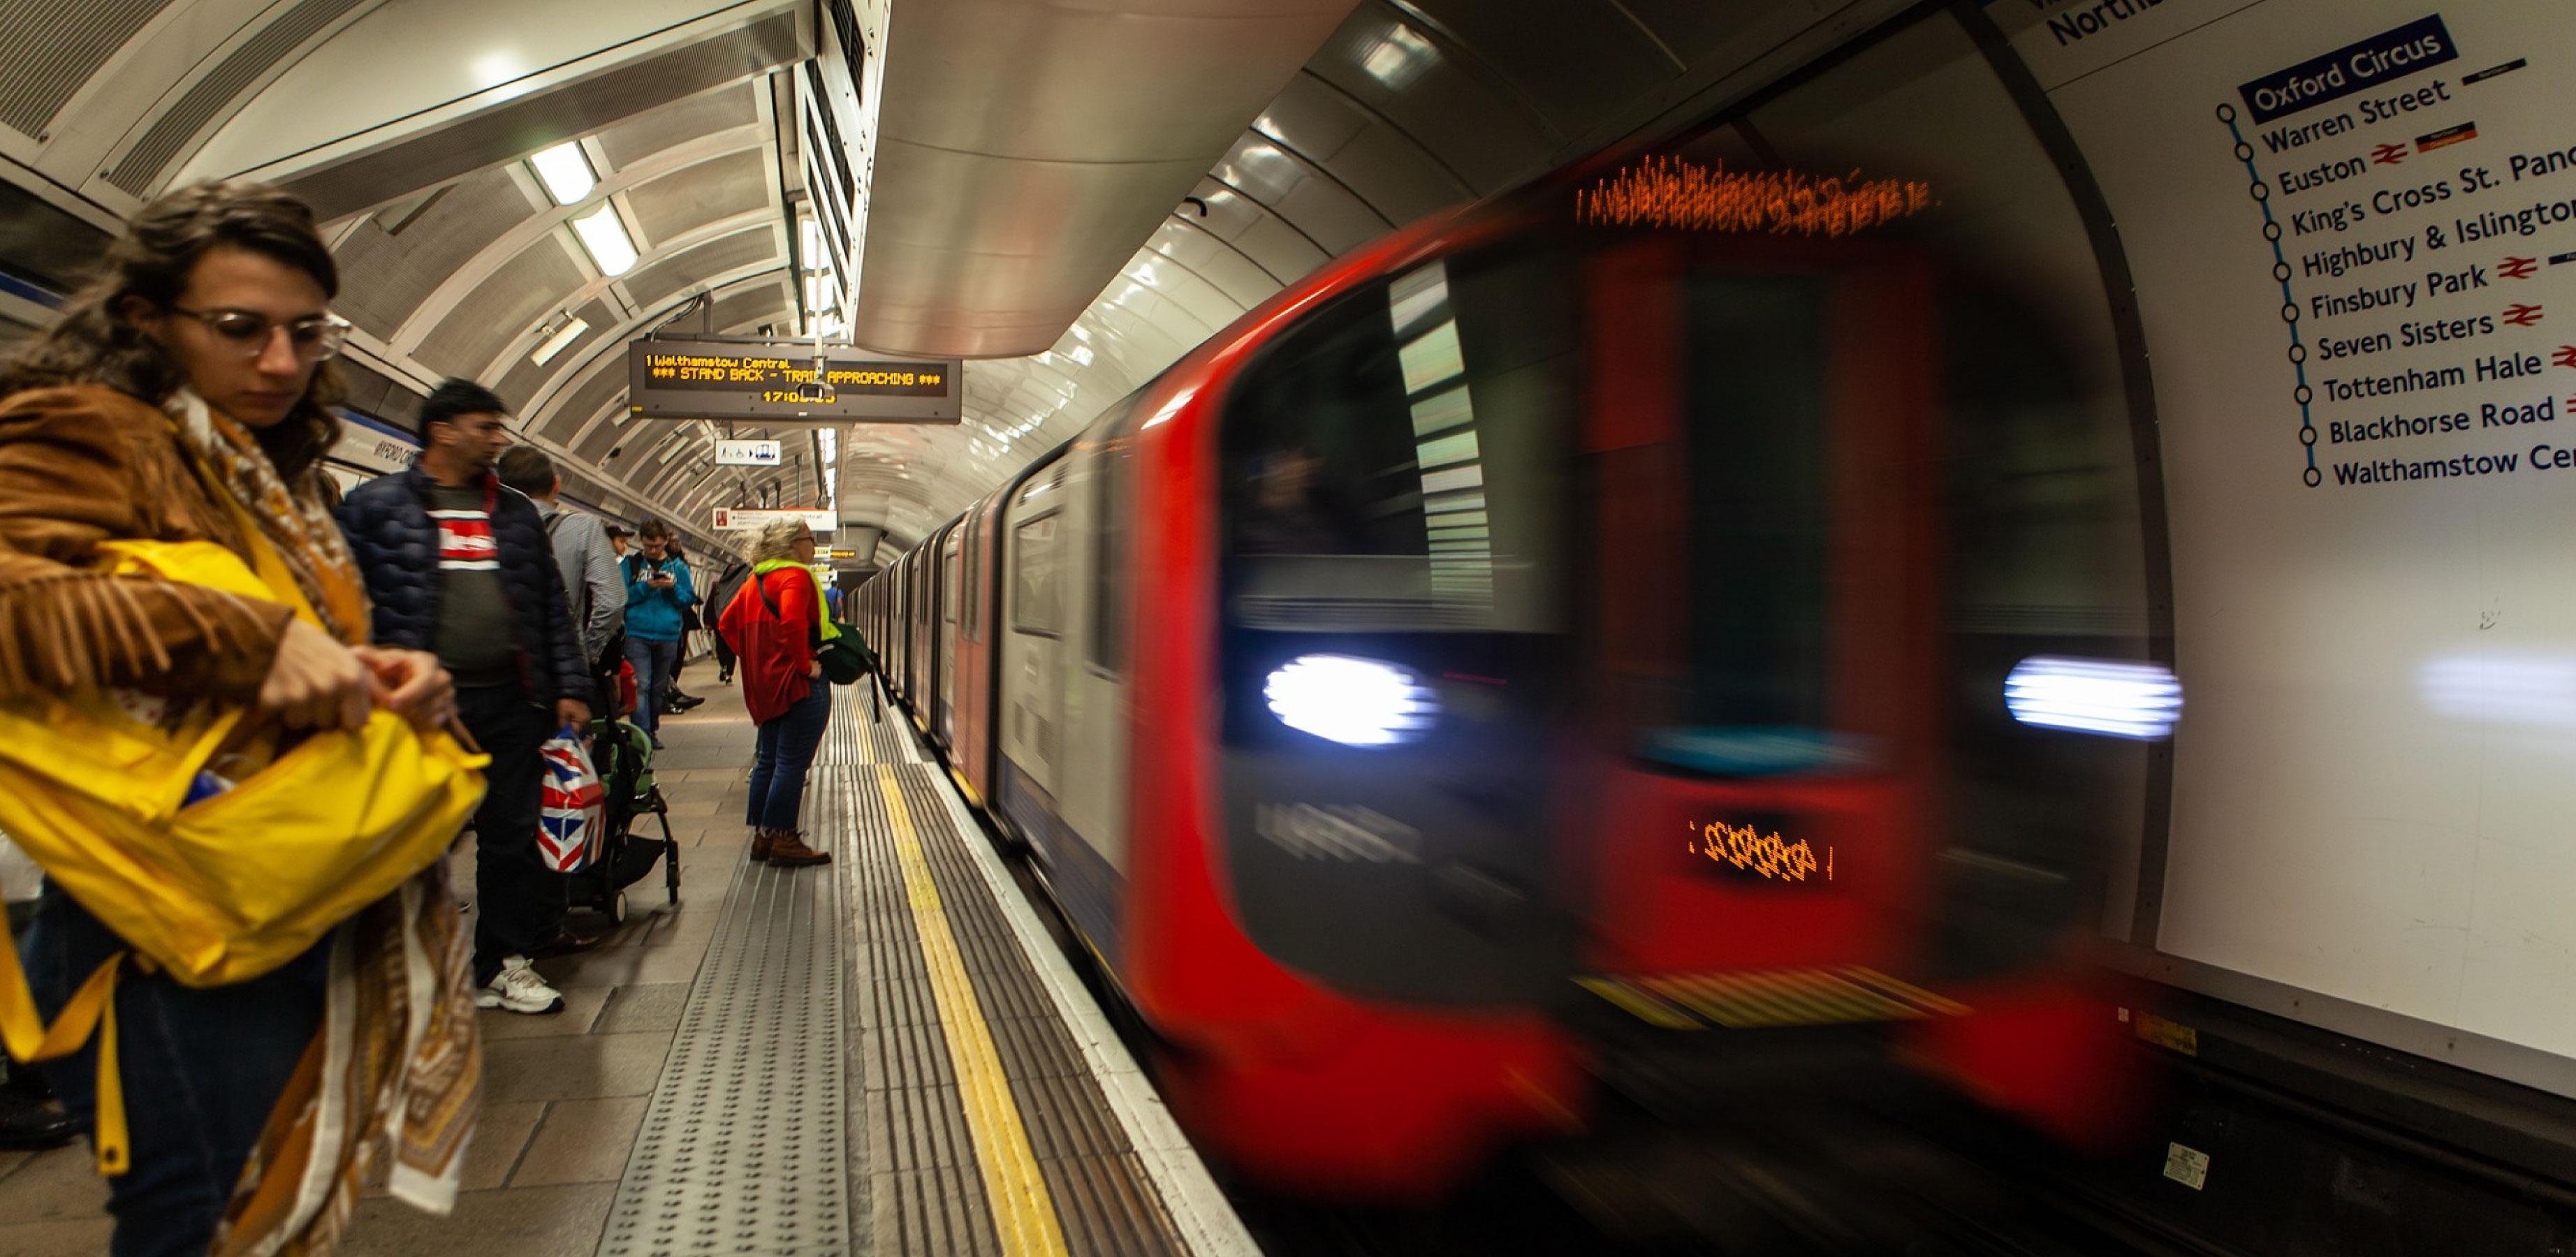 Image of a London Underground train approaching the station